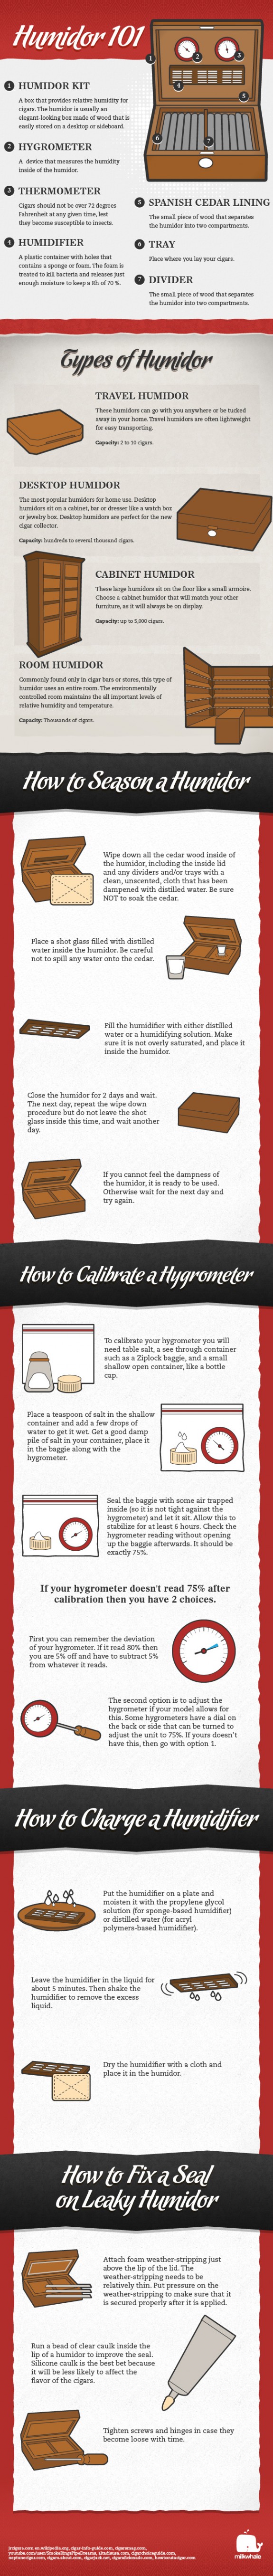 Infographic for Types of Humidor: An Infographic